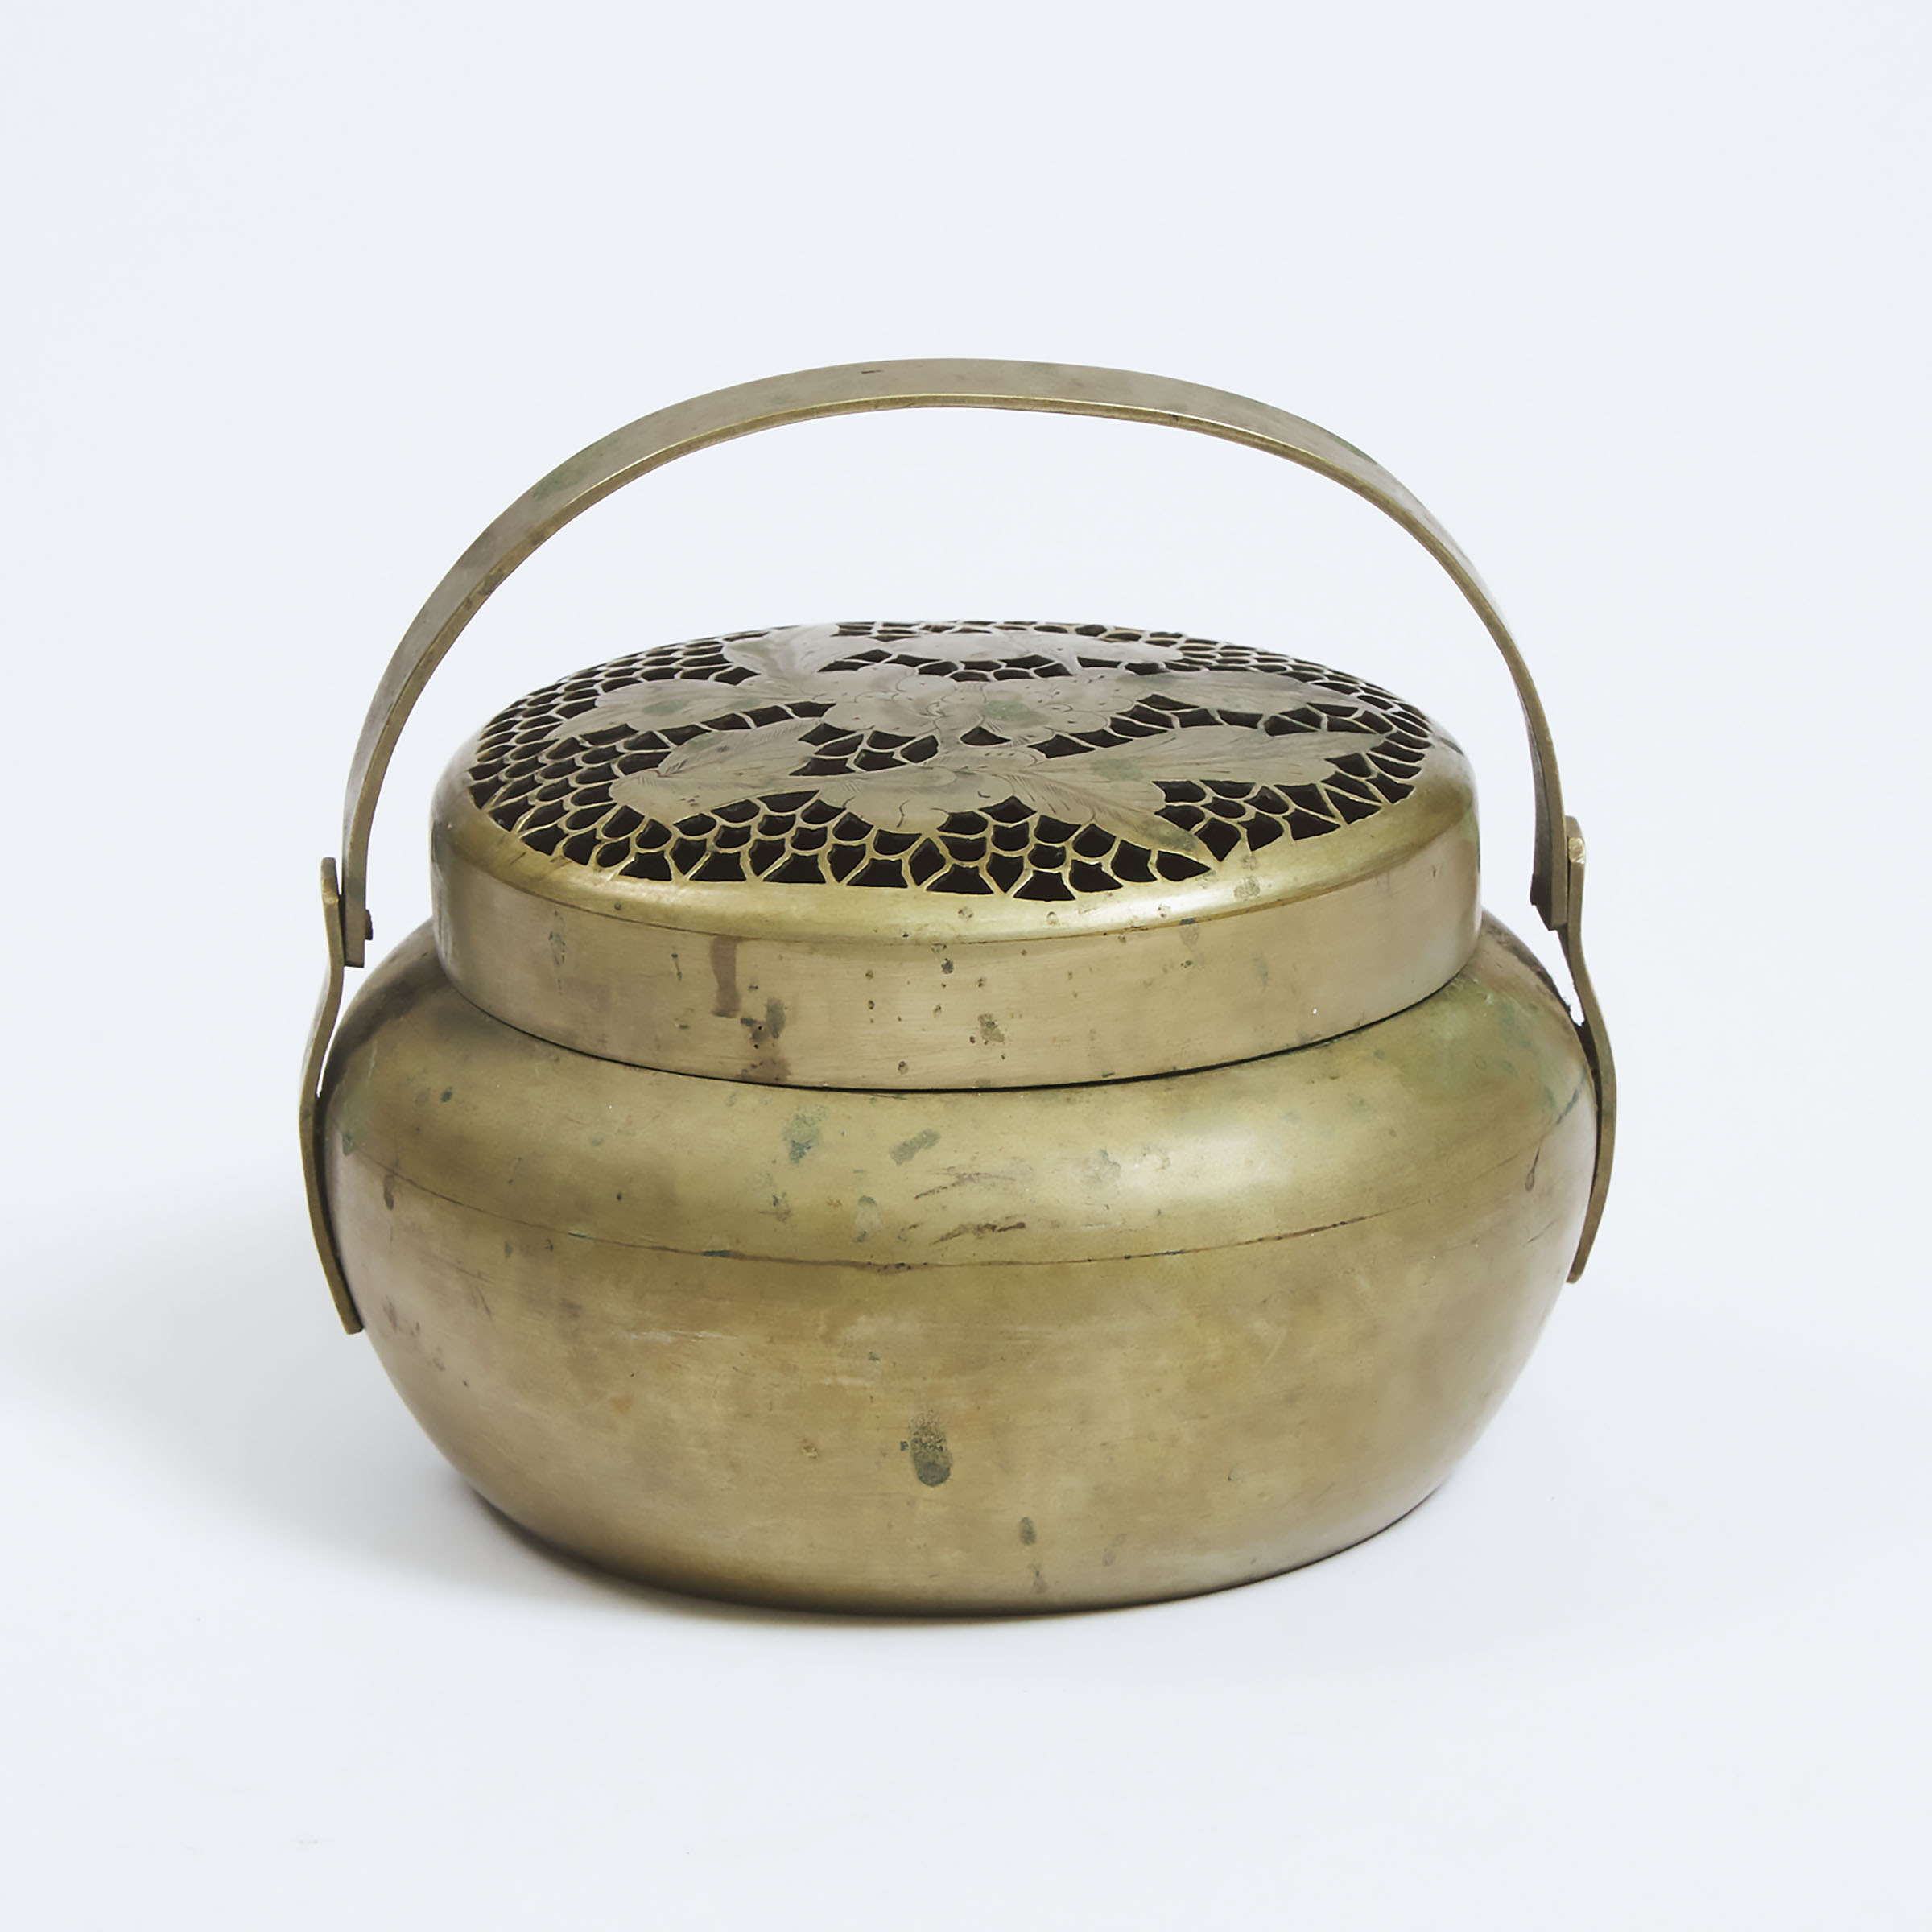 A Chinese Bronze Handwarmer and